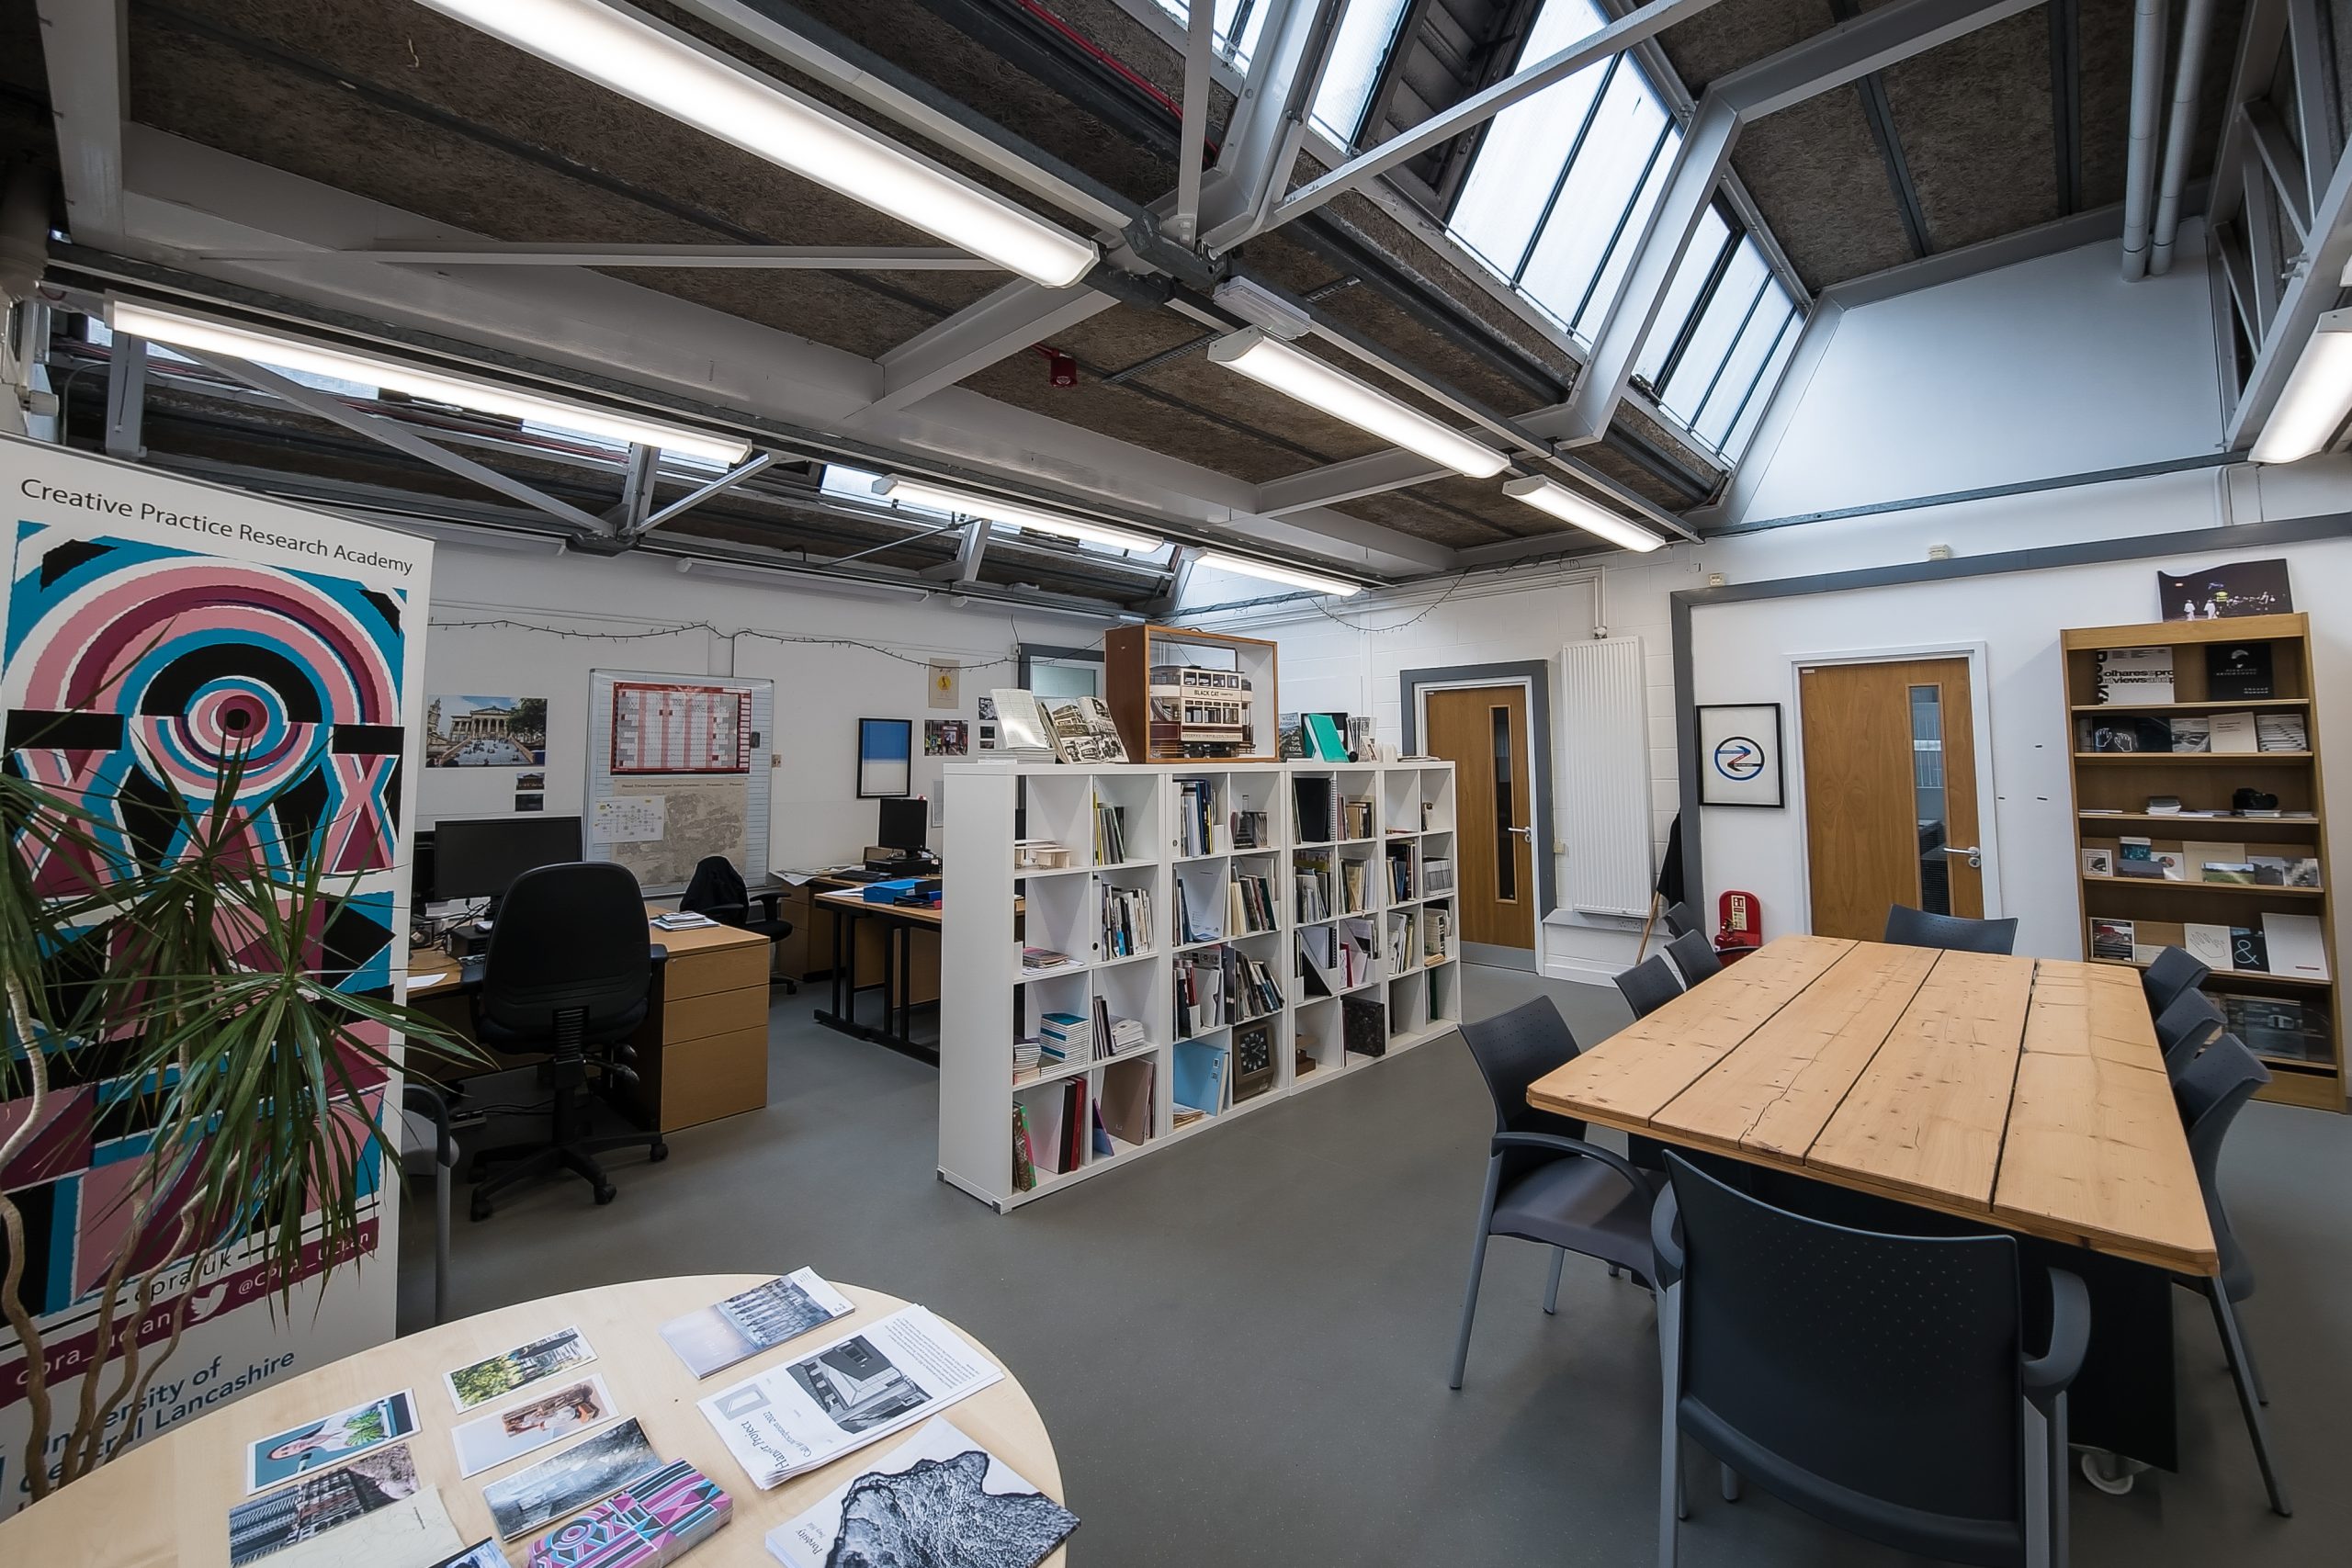 Photo of a large office, with stirp lighting and skylight windows. There is a colourful banner to the left of the image and a long table on the right, made from wooden planks. The room is divided by a large bookcase, filled with books and with a model tram in a Perspex case on the top.